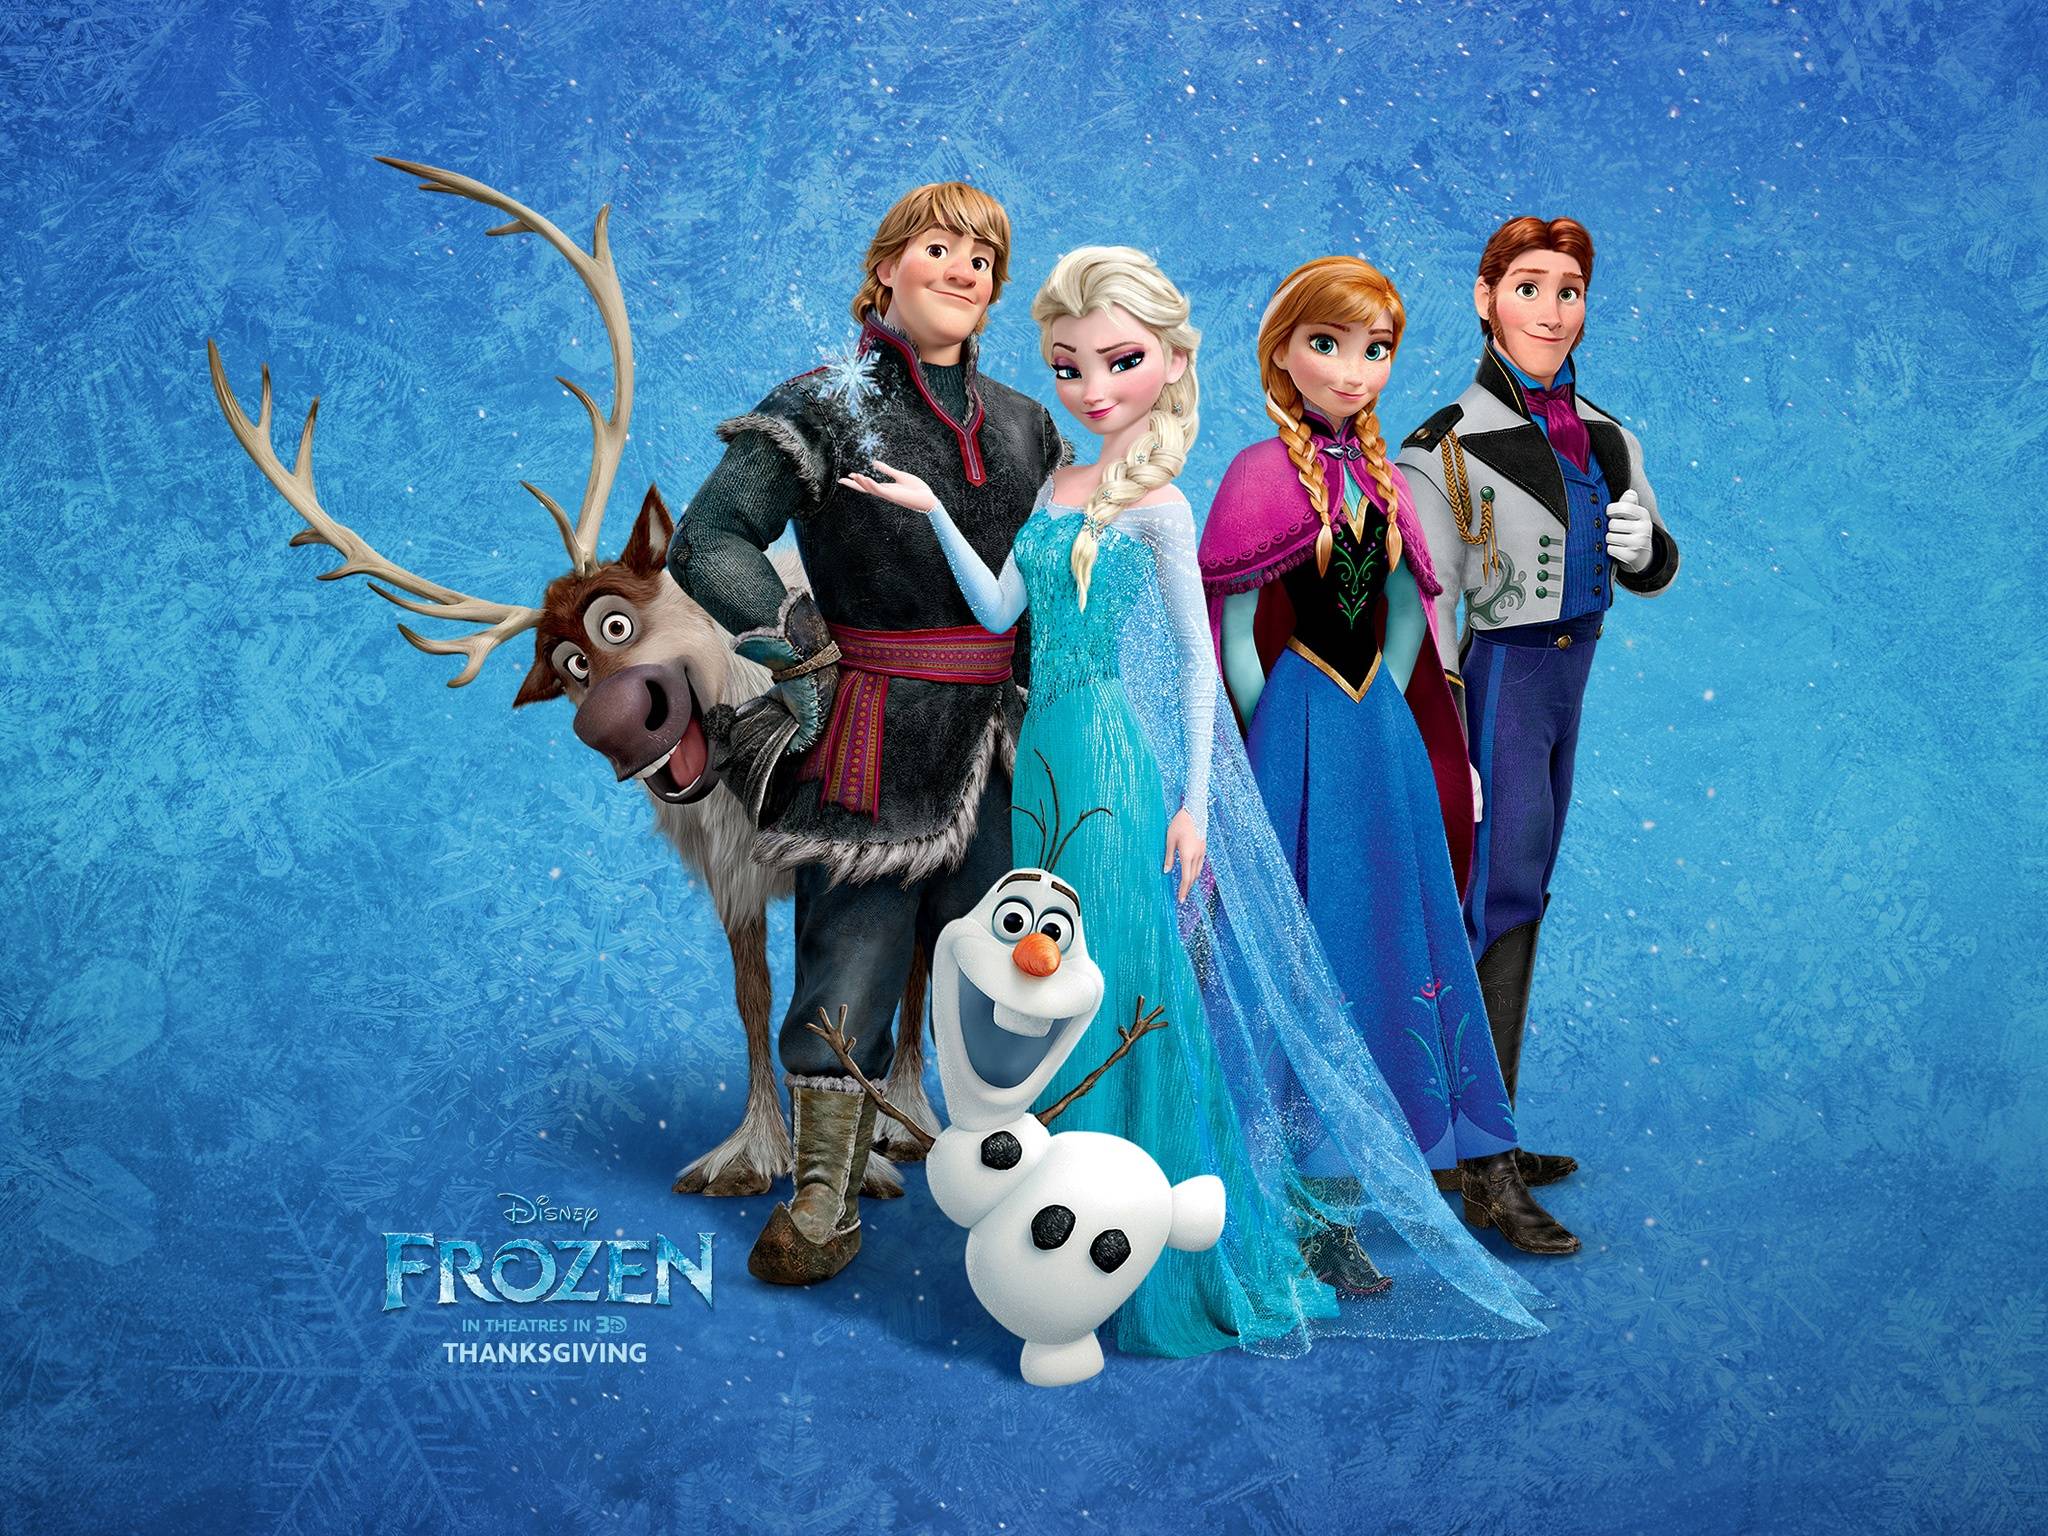 Wallpaper for Frozen Frozen is a 2013 American computer animated